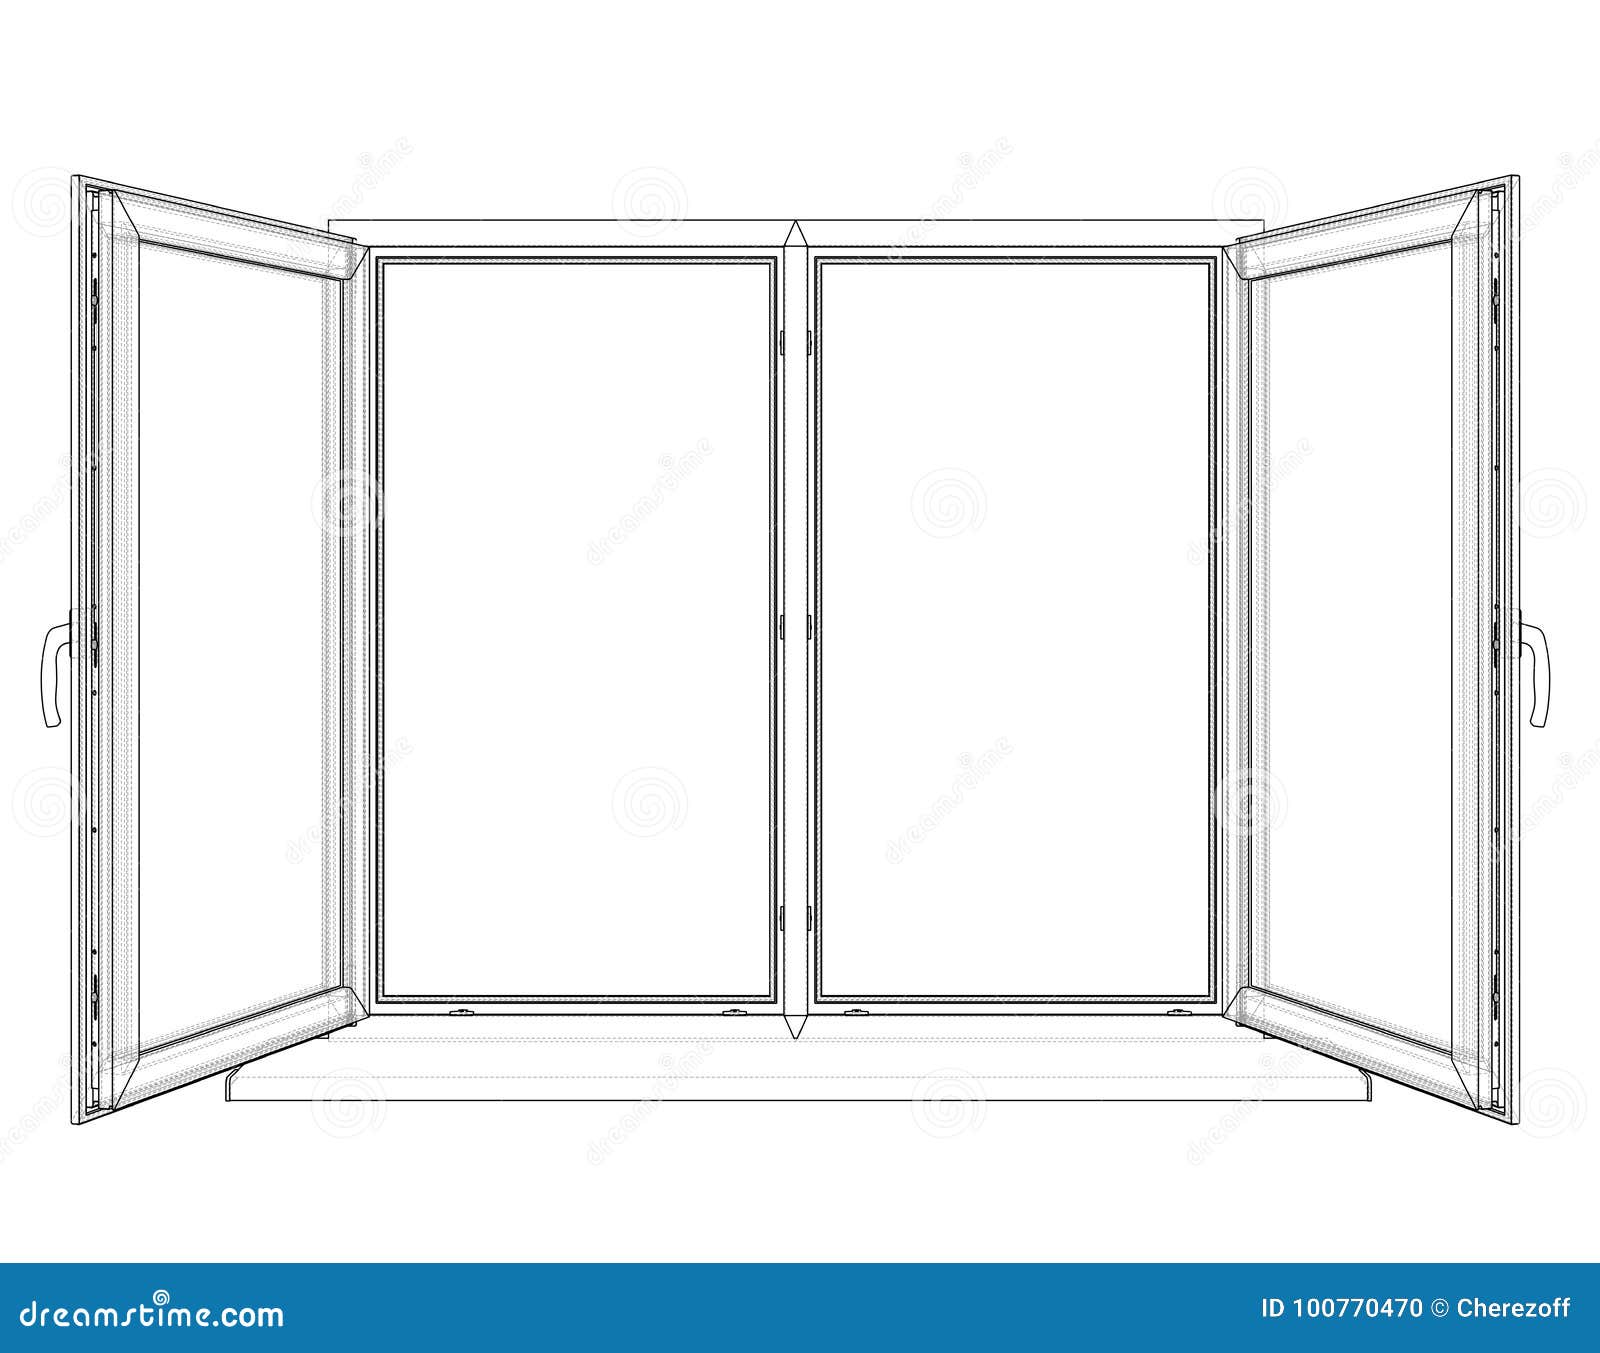 Sliding Window With Section - Free CAD Drawings